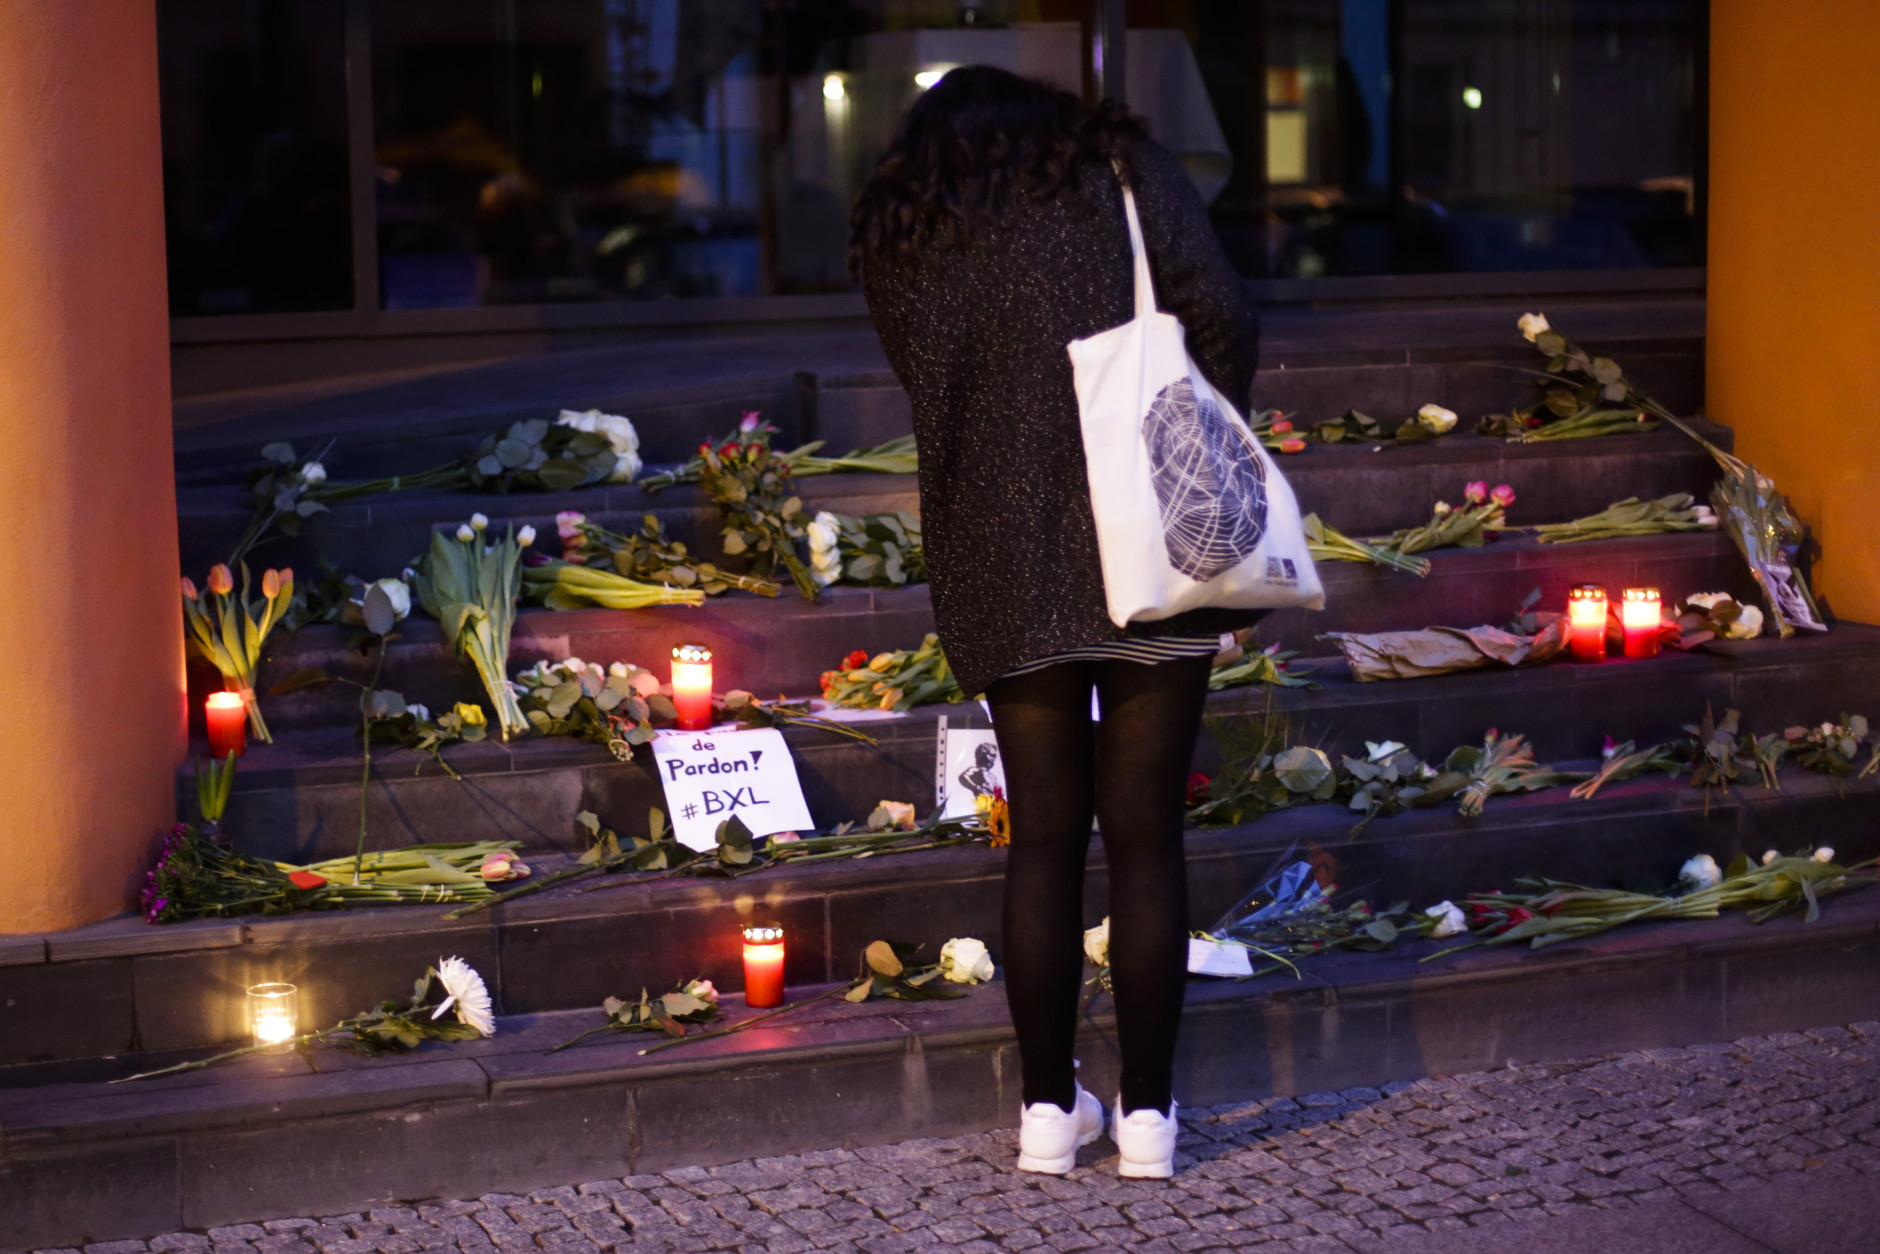 A woman lays flowers in front of the Belgium Embassy in Berlin, Germany, Tuesday, March 22, 2016, after Tuesday's terrorist attacks in Brussels. (AP Photo/Markus Schreiber)